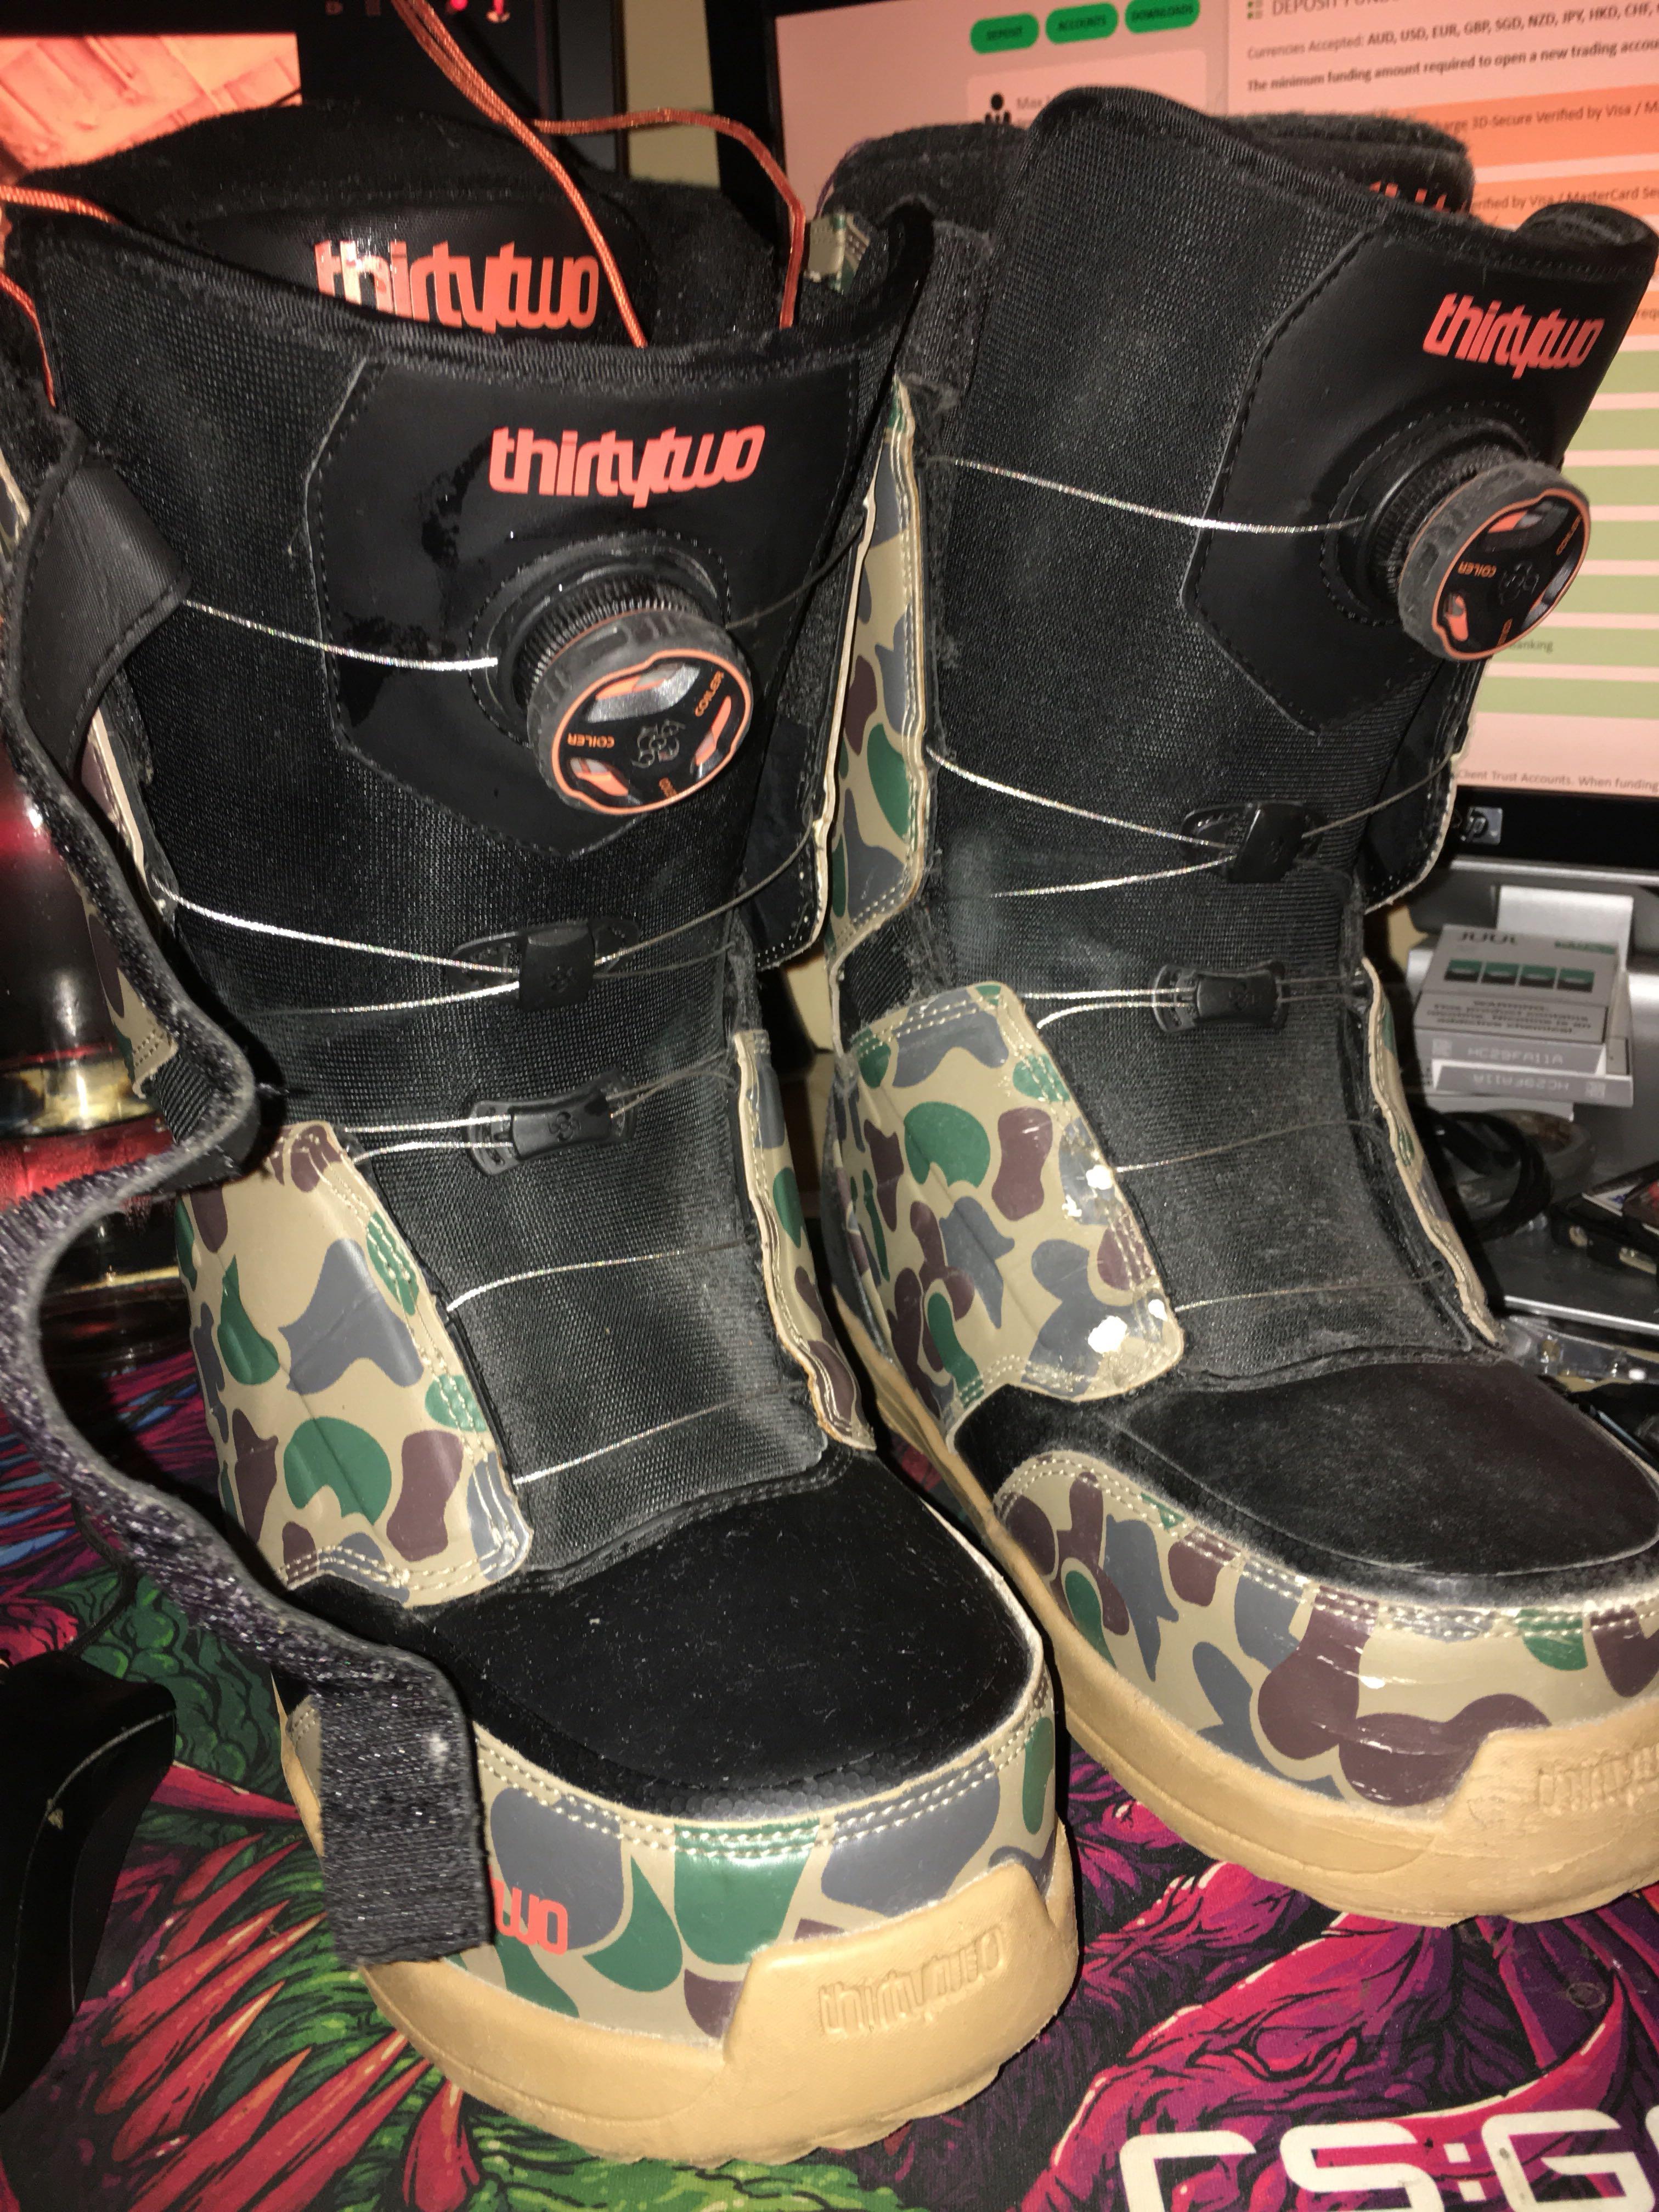 32 lashed double boa snowboard boots